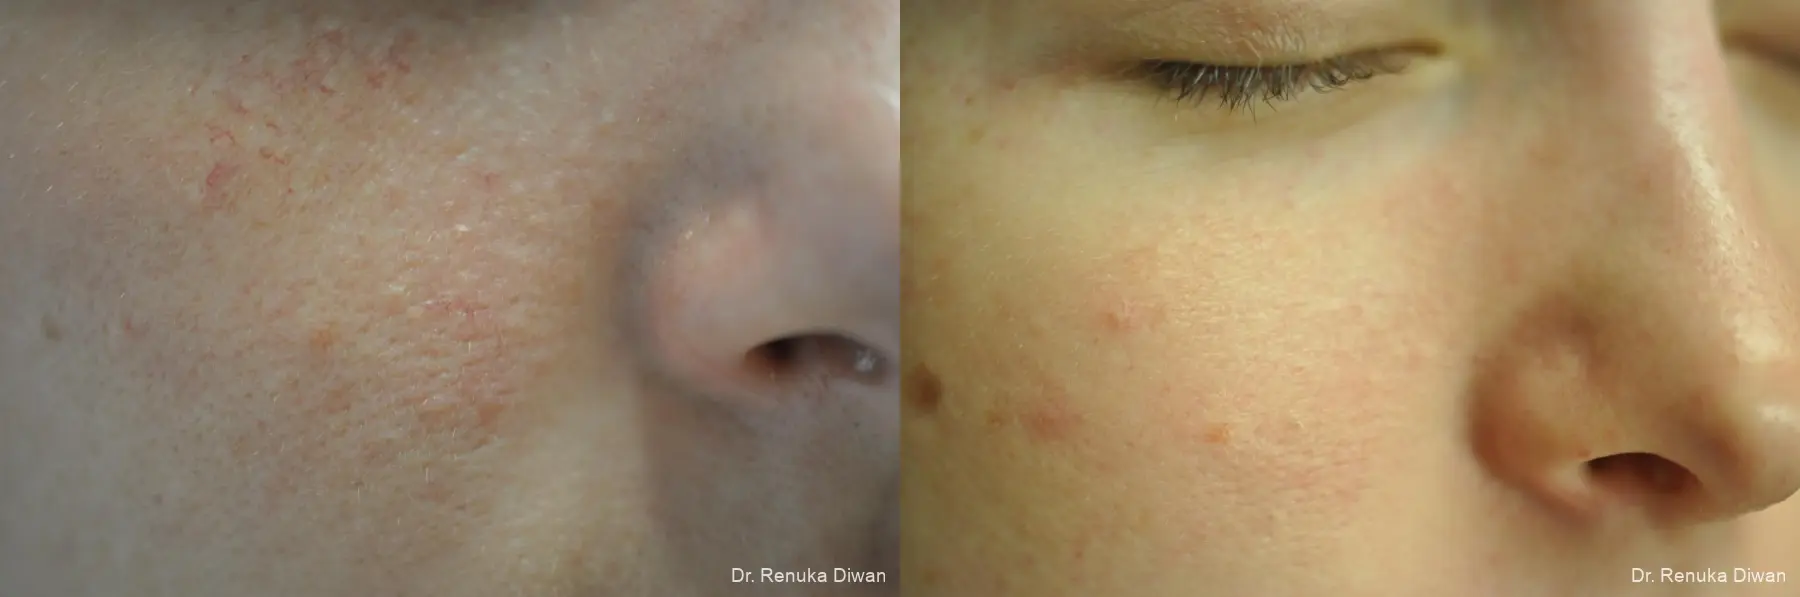 Laser For Veins And Redness: Patient 26 - Before and After 1